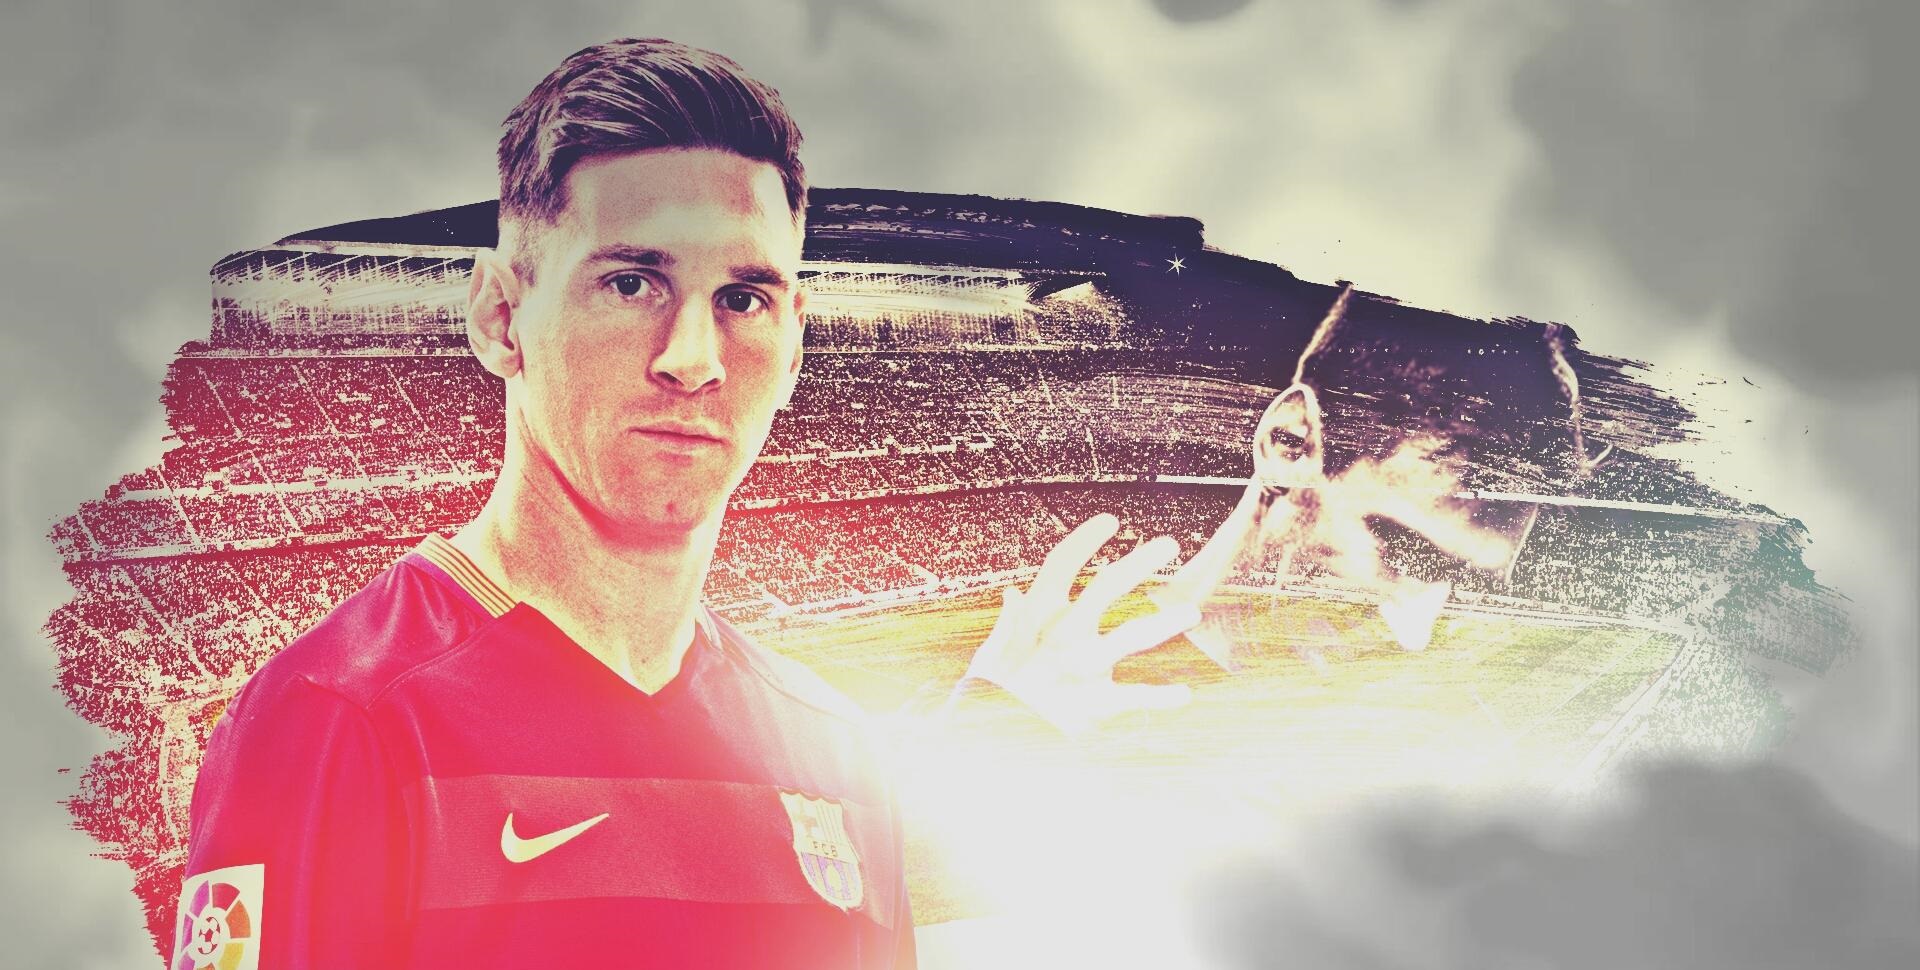 Lionel Messi Wallpaper HD Background Of Your